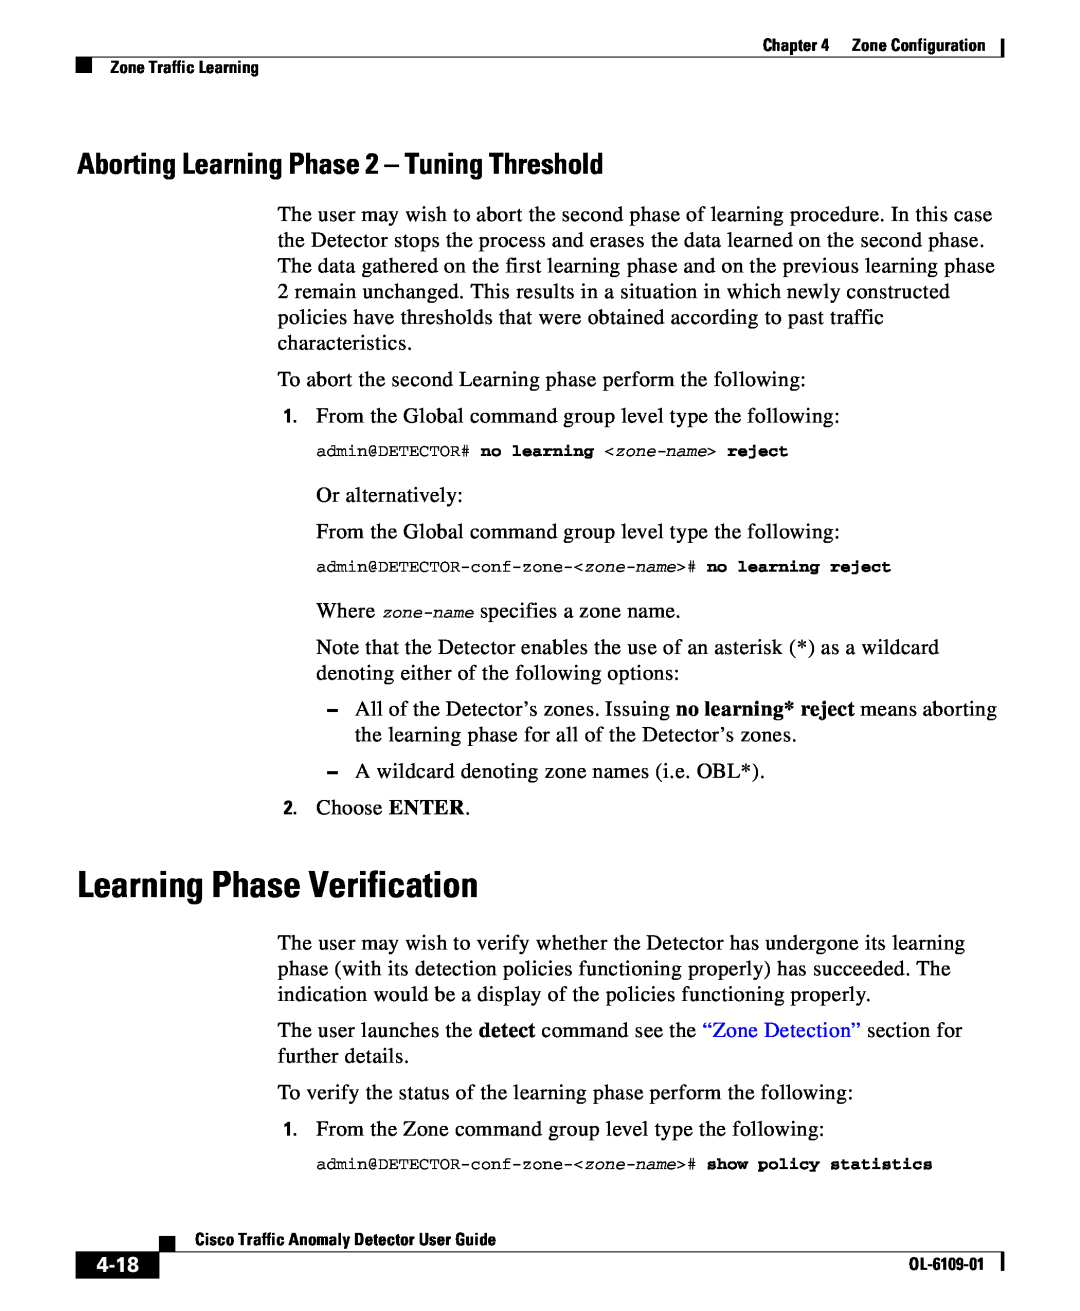 Cisco Systems OL-6109-01 manual Learning Phase Verification, Aborting Learning Phase 2 - Tuning Threshold, 4-18 